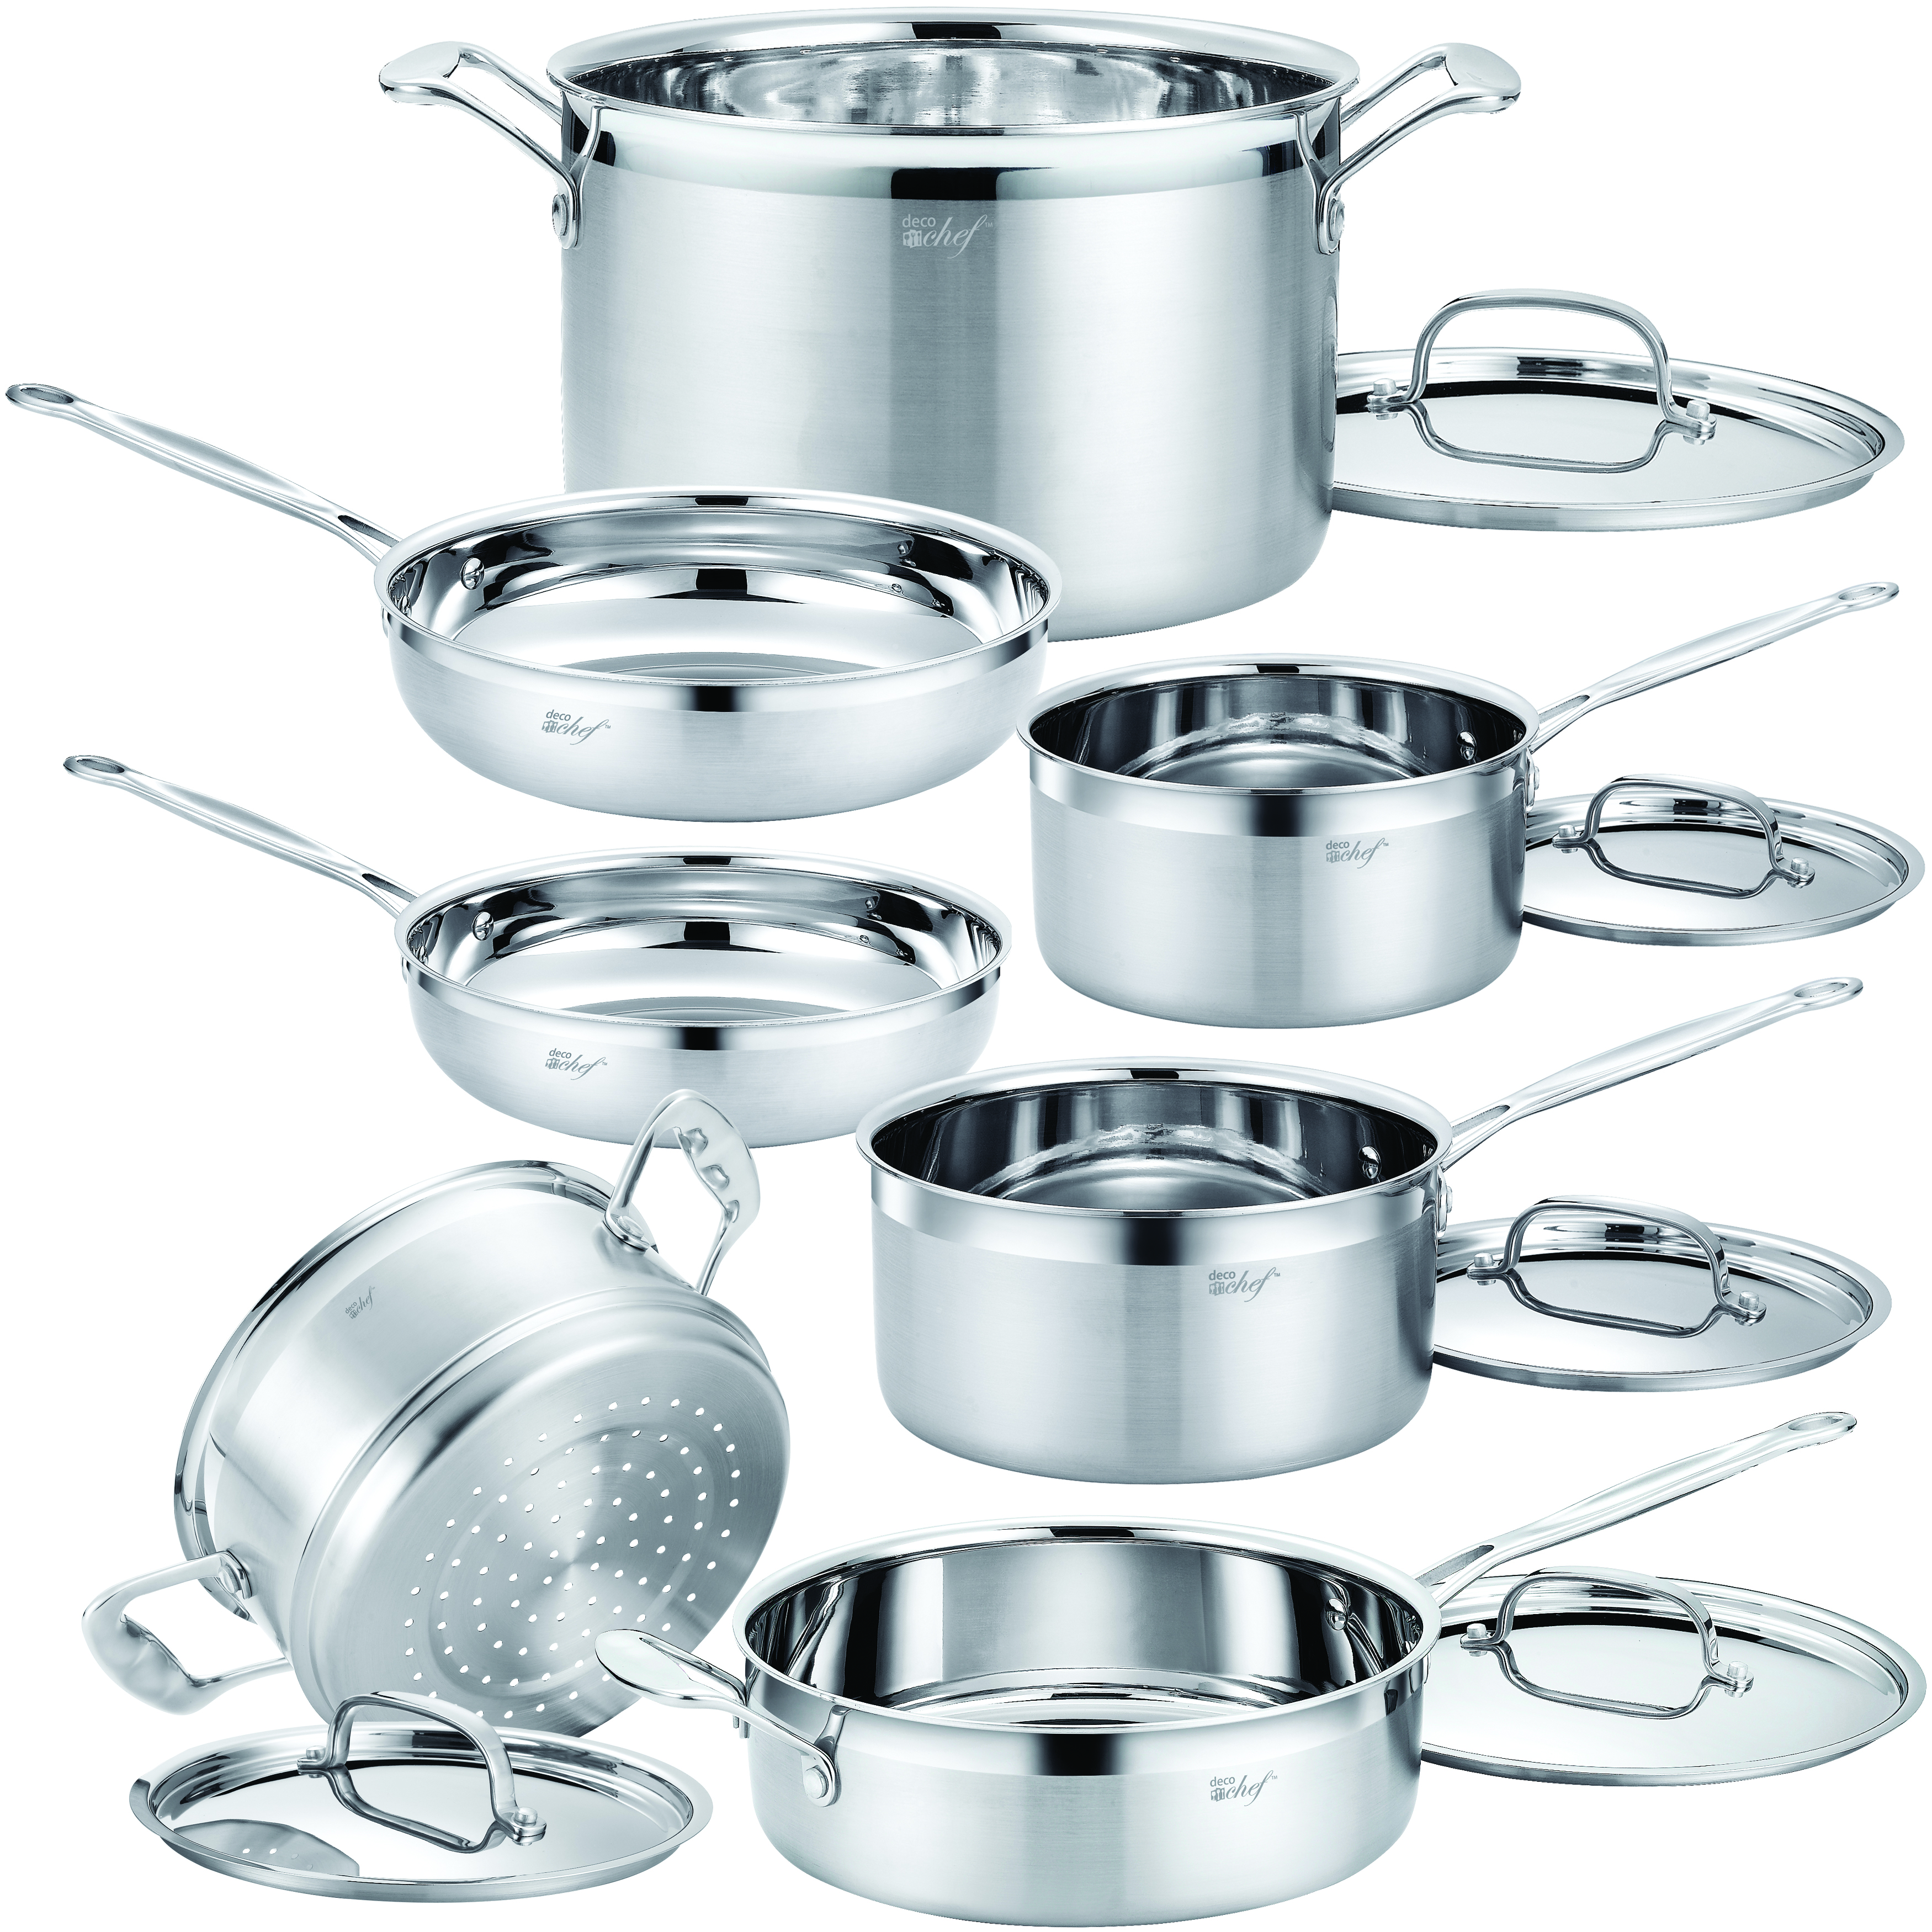 Photos - Fryer Deco Chef Stainless Steel Cookware 12 Piece Starter Set, Tri-Ply Core, Riv